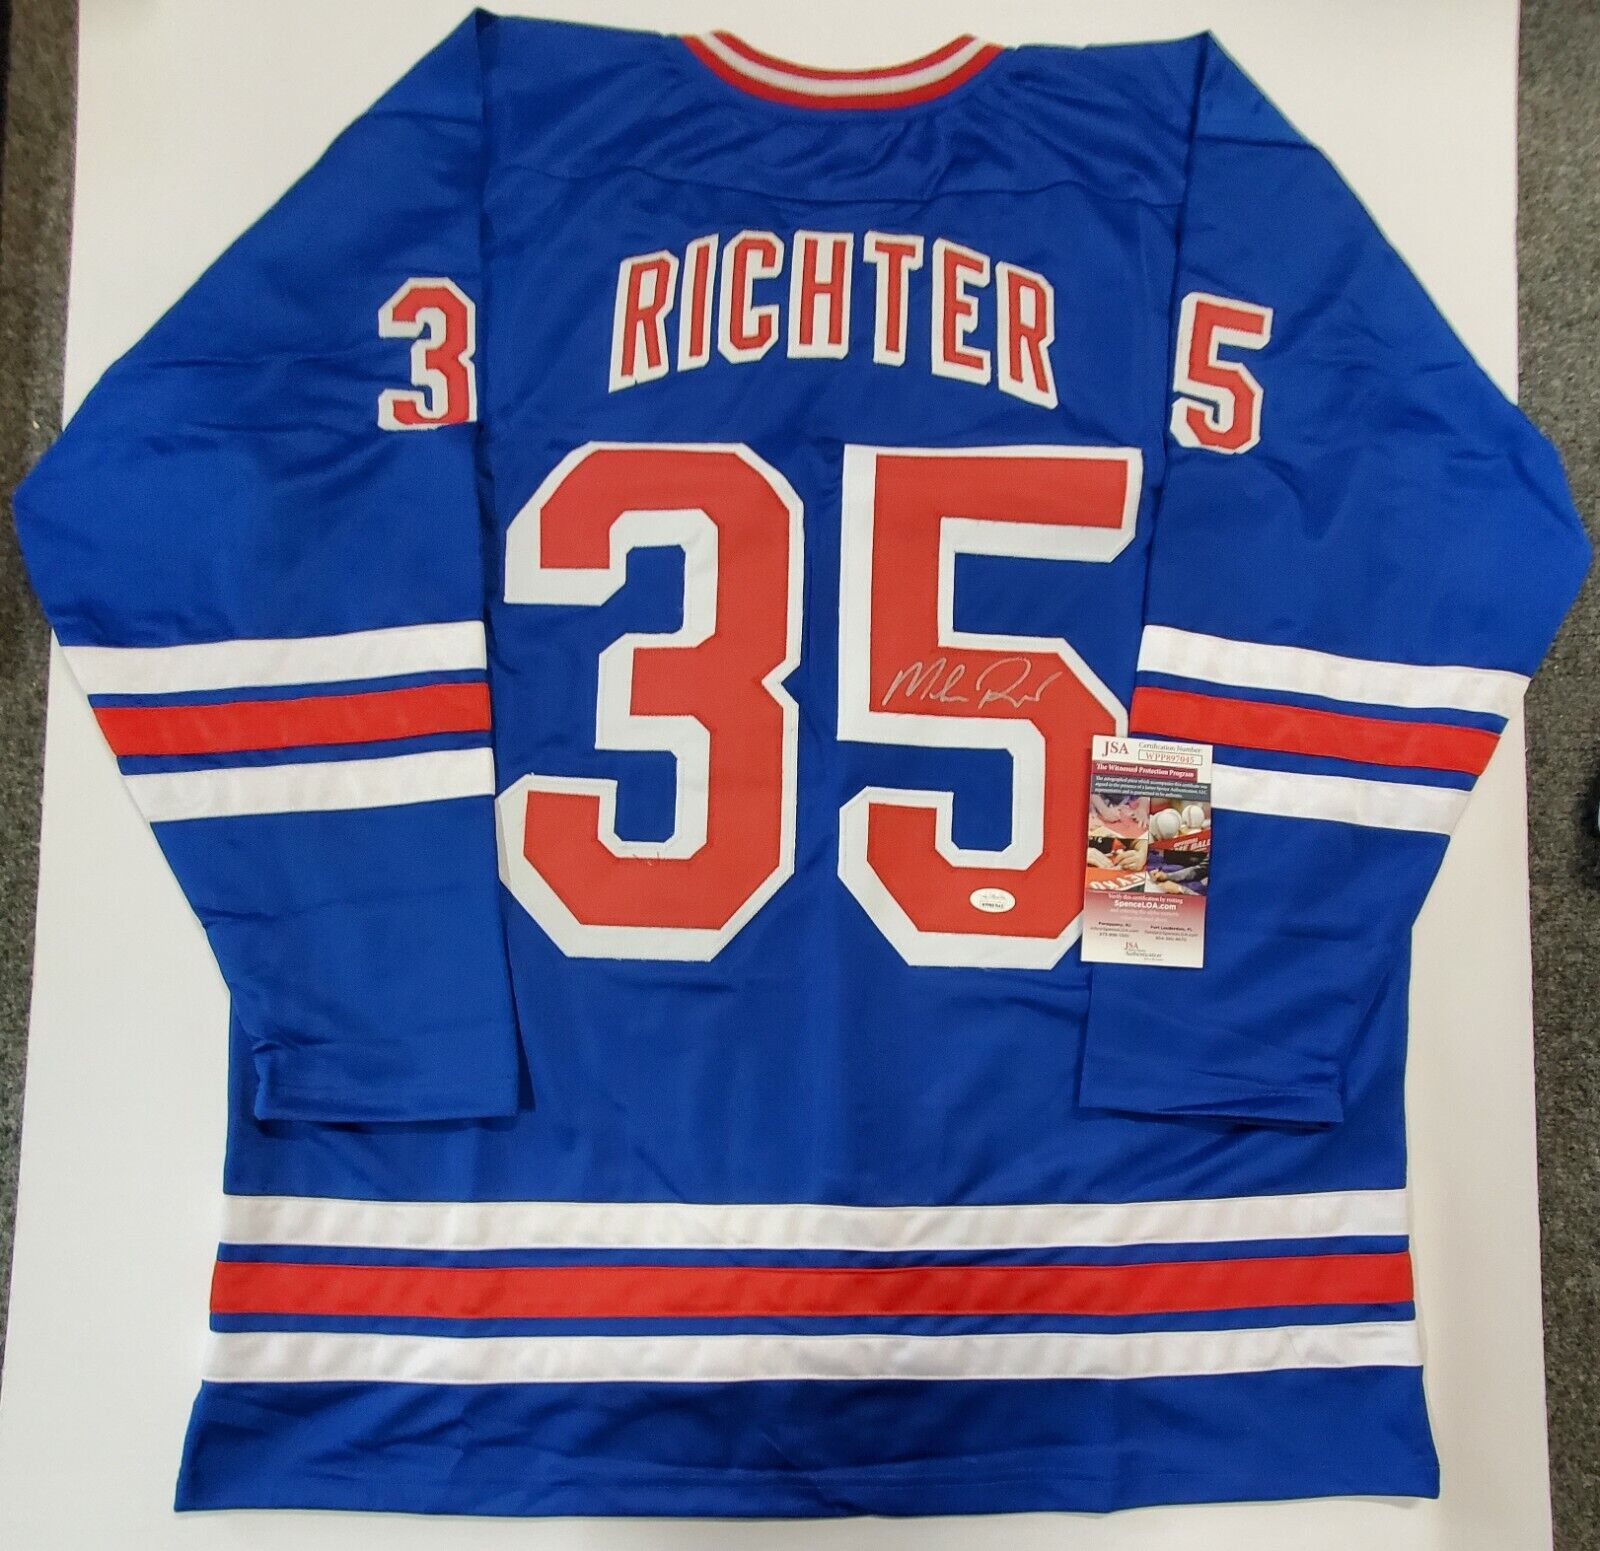 MVP Authentics N.Y. Rangers Mike Richter Autographed Signed Jersey Jsa  Coa 134.10 sports jersey framing , jersey framing